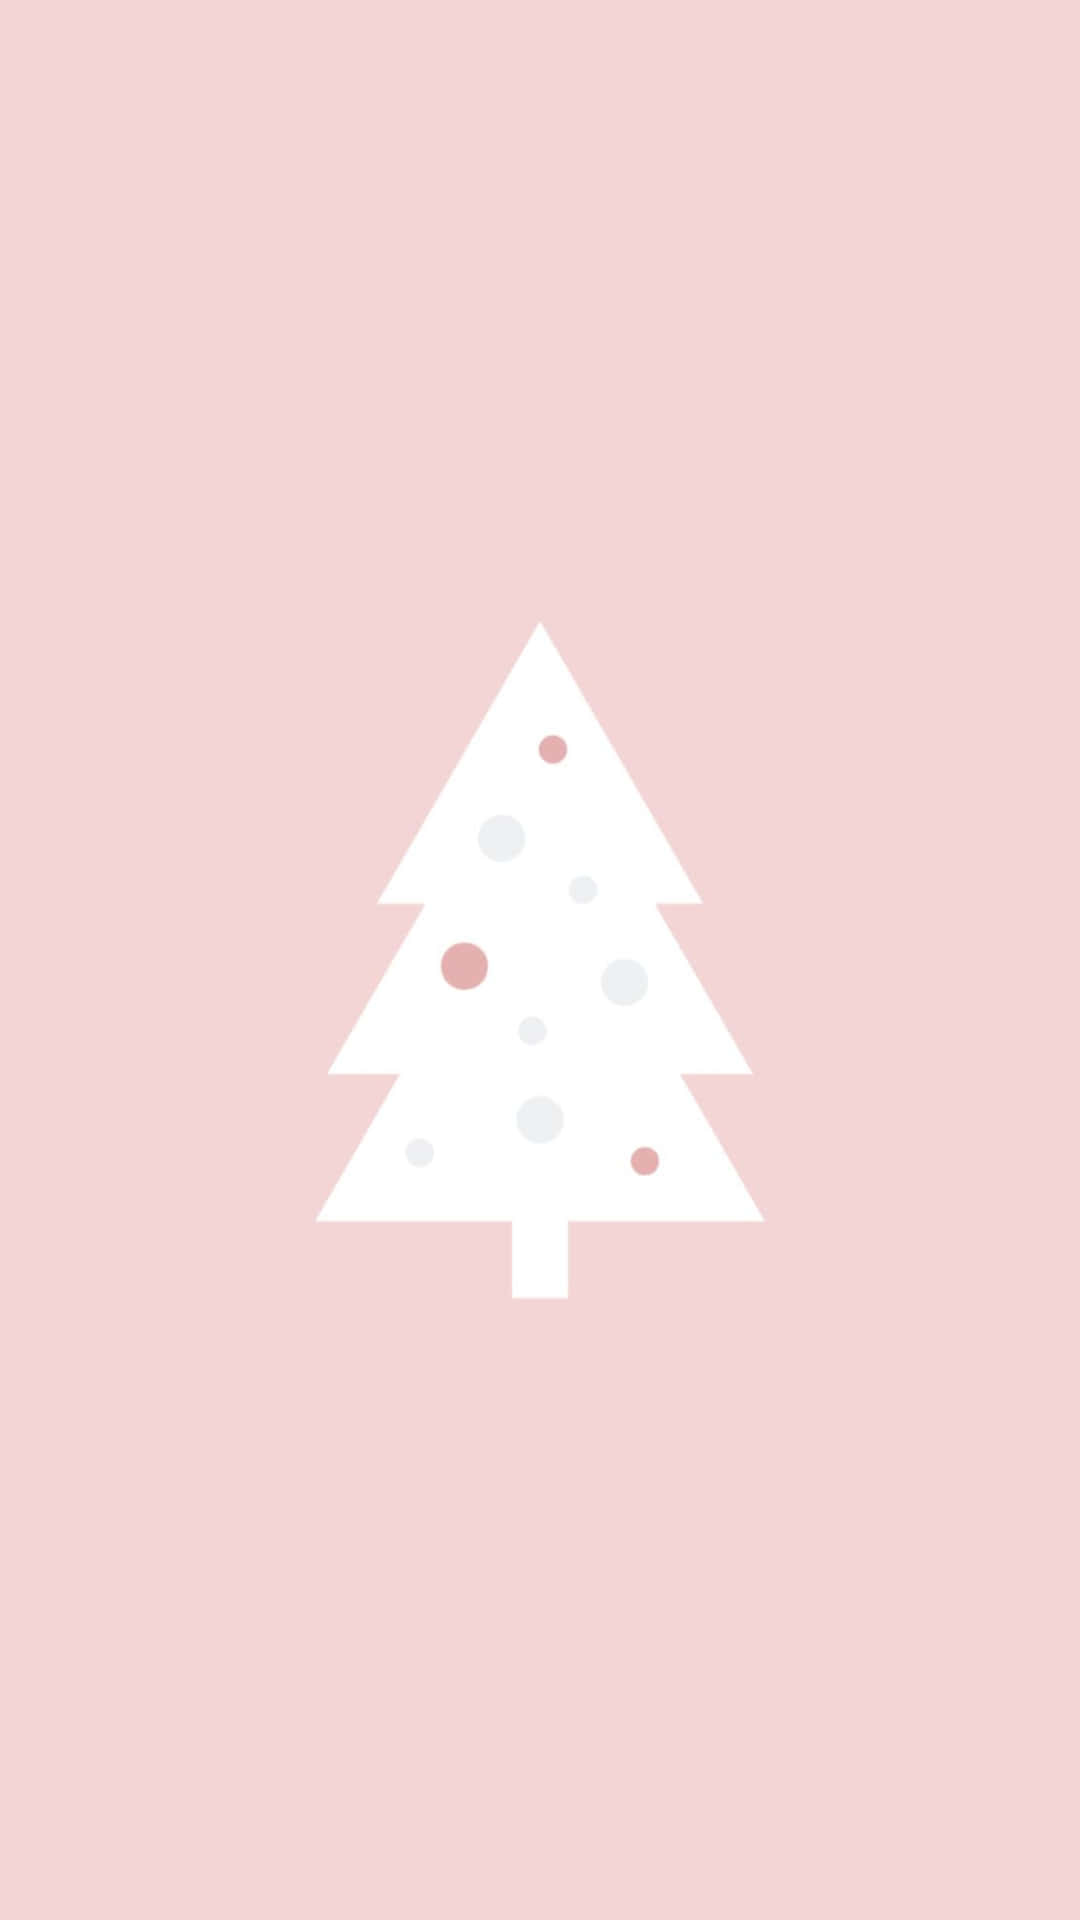 Cute Christmas Tree Pink Background Wallpaper